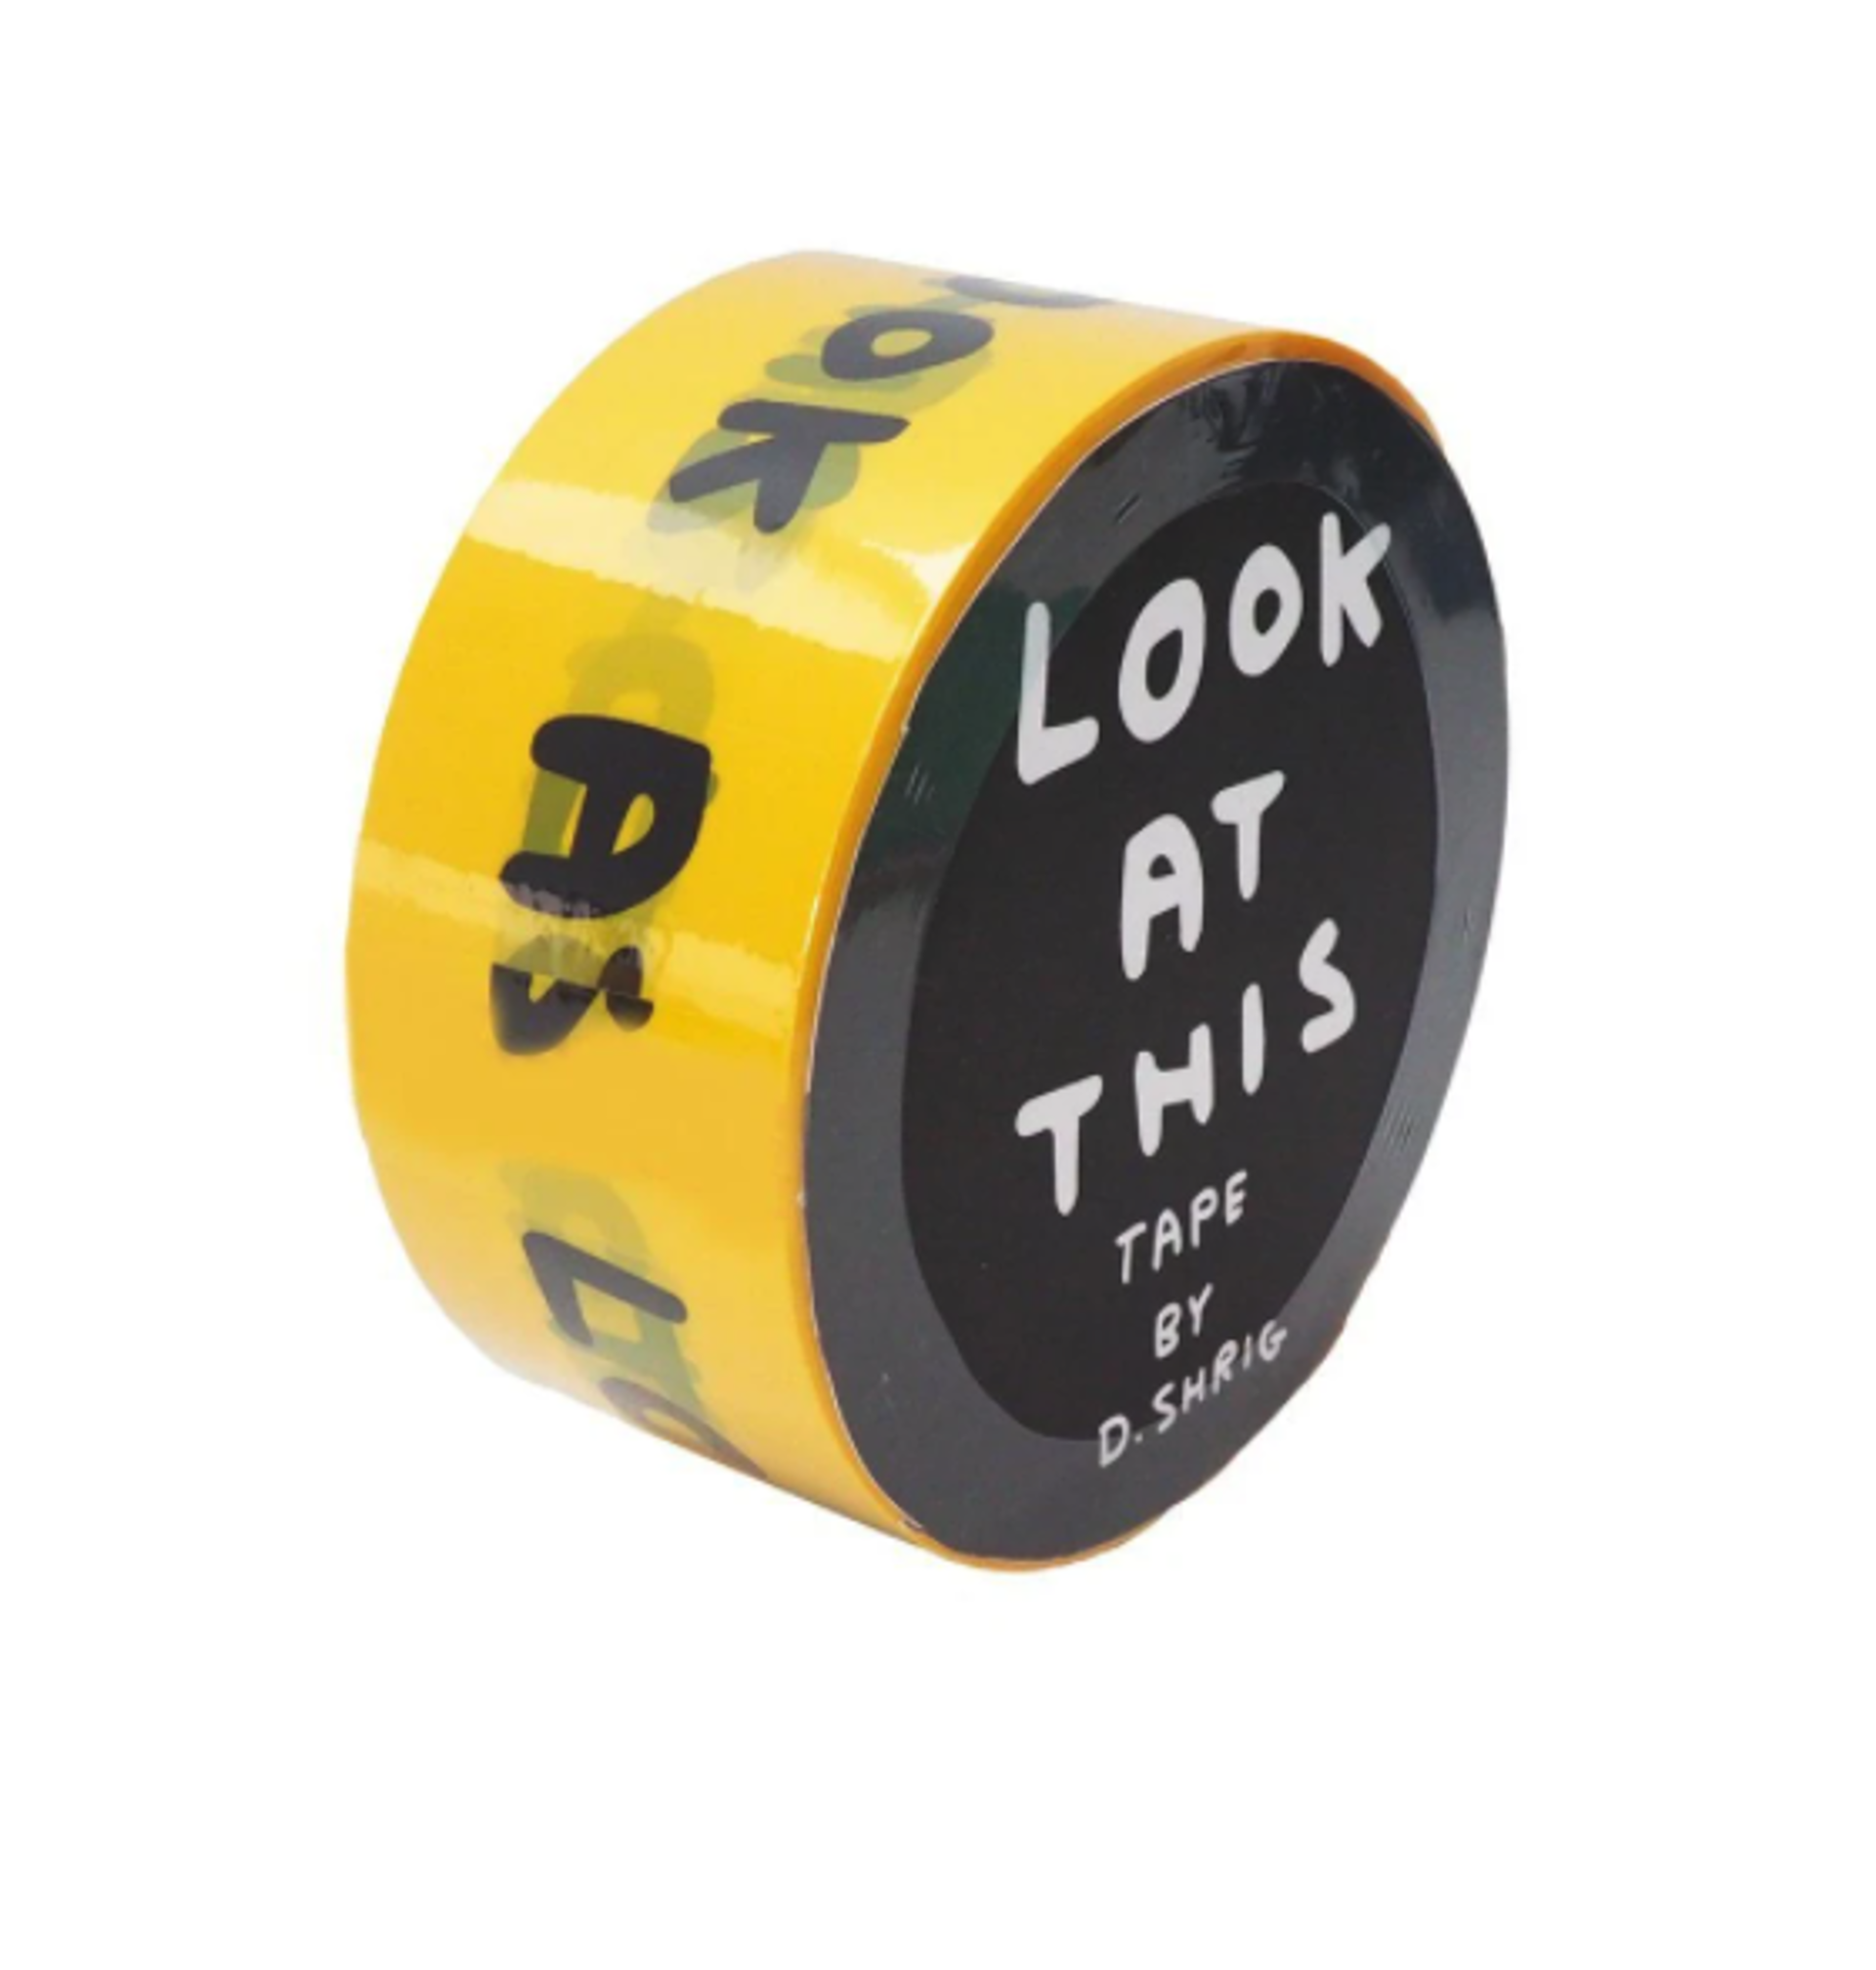 Look At This Packing Tape by David Shrigley